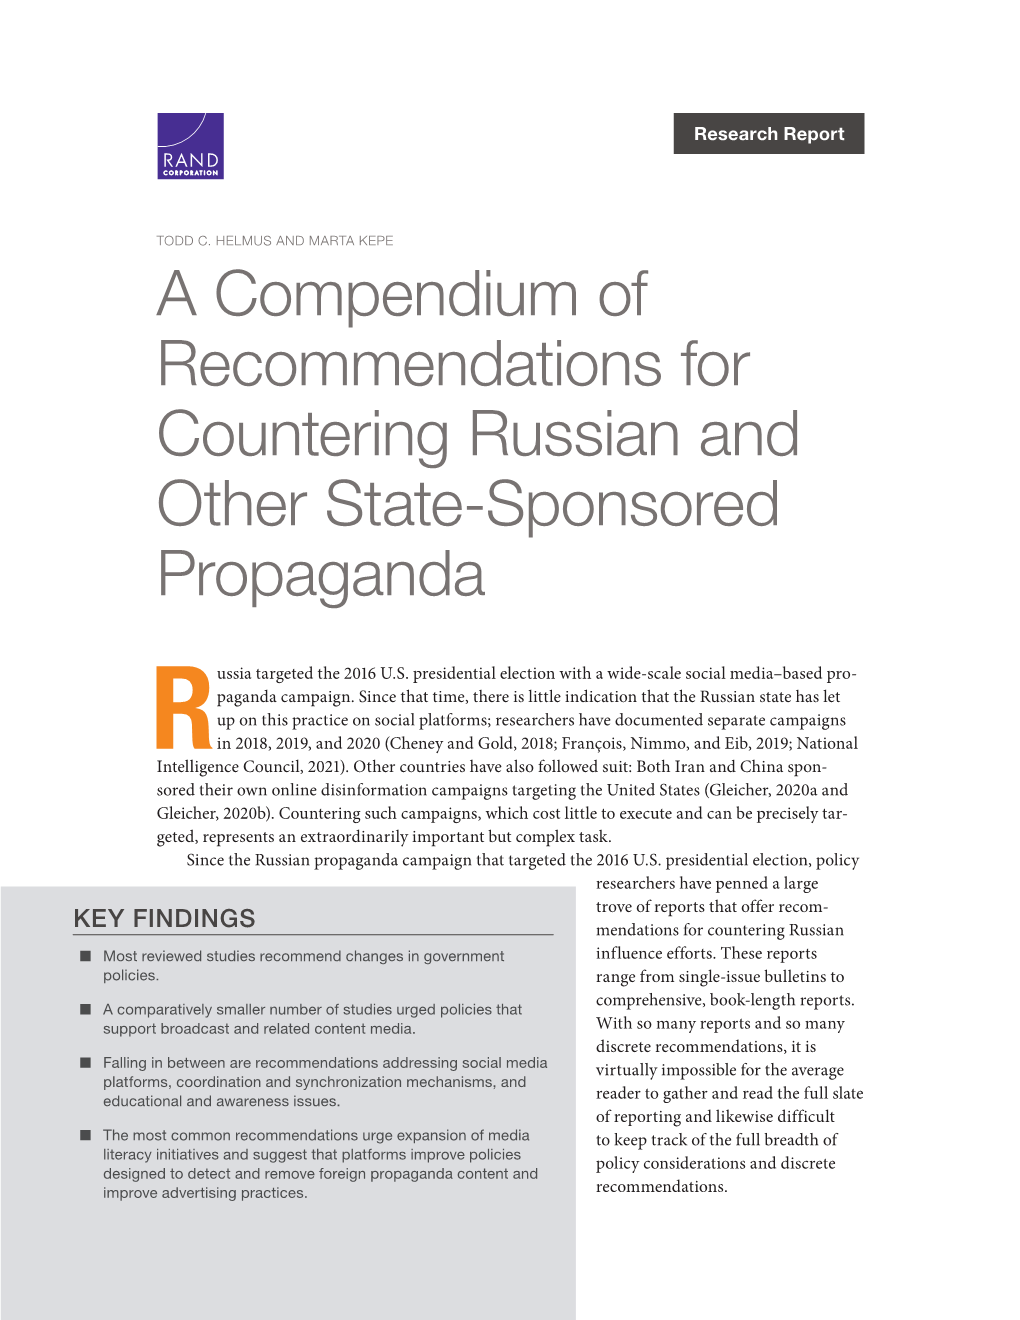 A Compendium of Recommendations for Countering Russian and Other State-Sponsored Propaganda